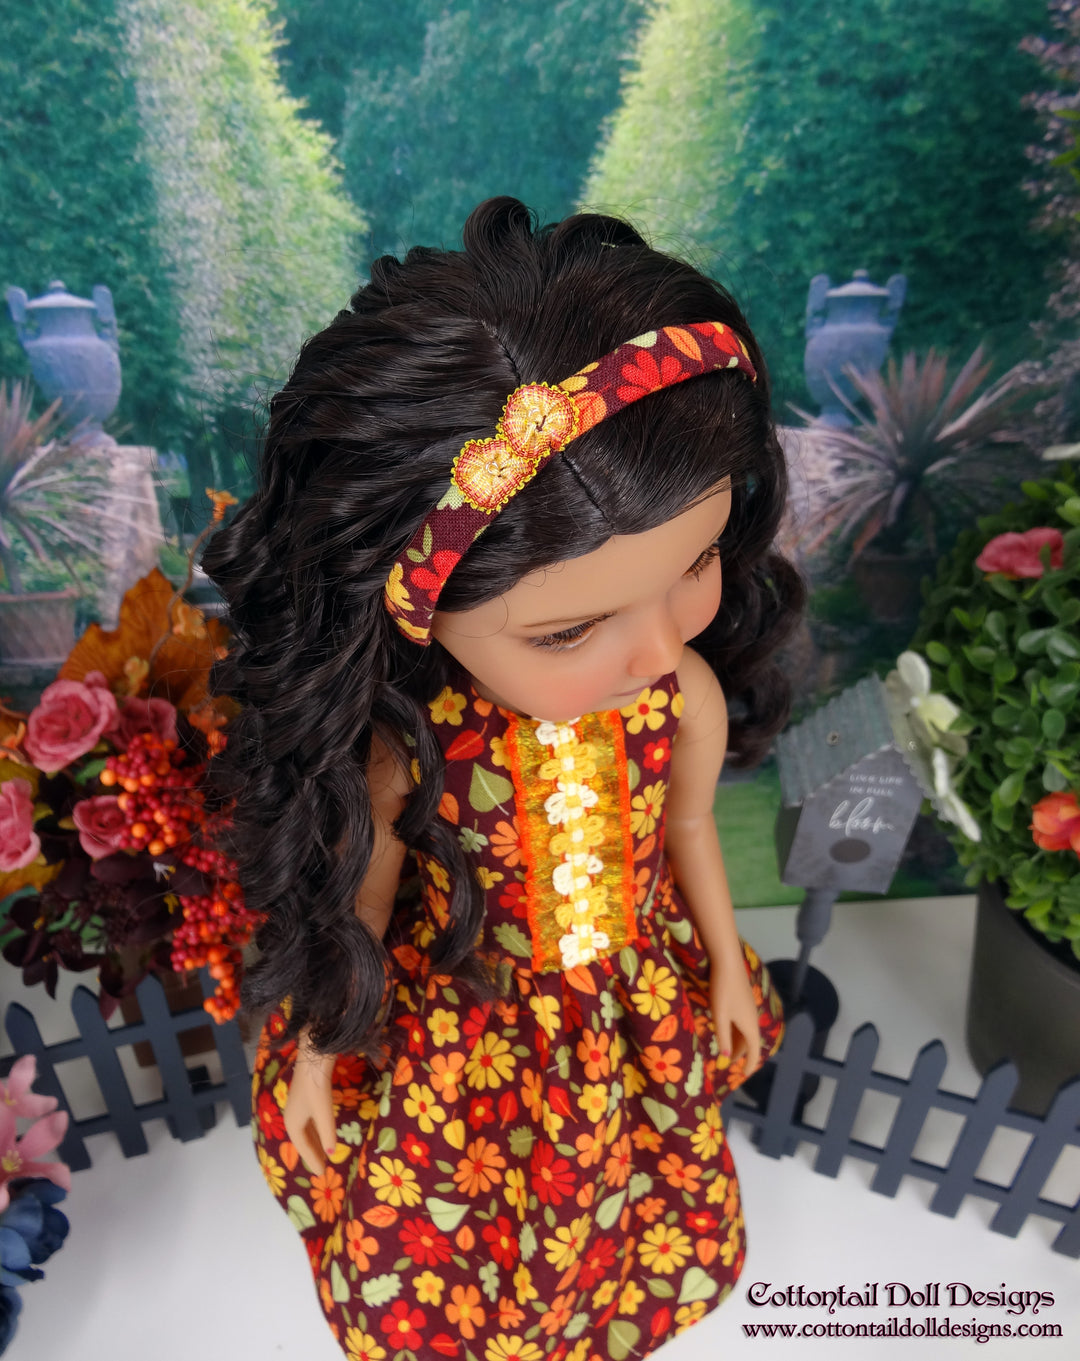 Sunset Daisies - dress with shoes for Ruby Red Fashion Friends doll